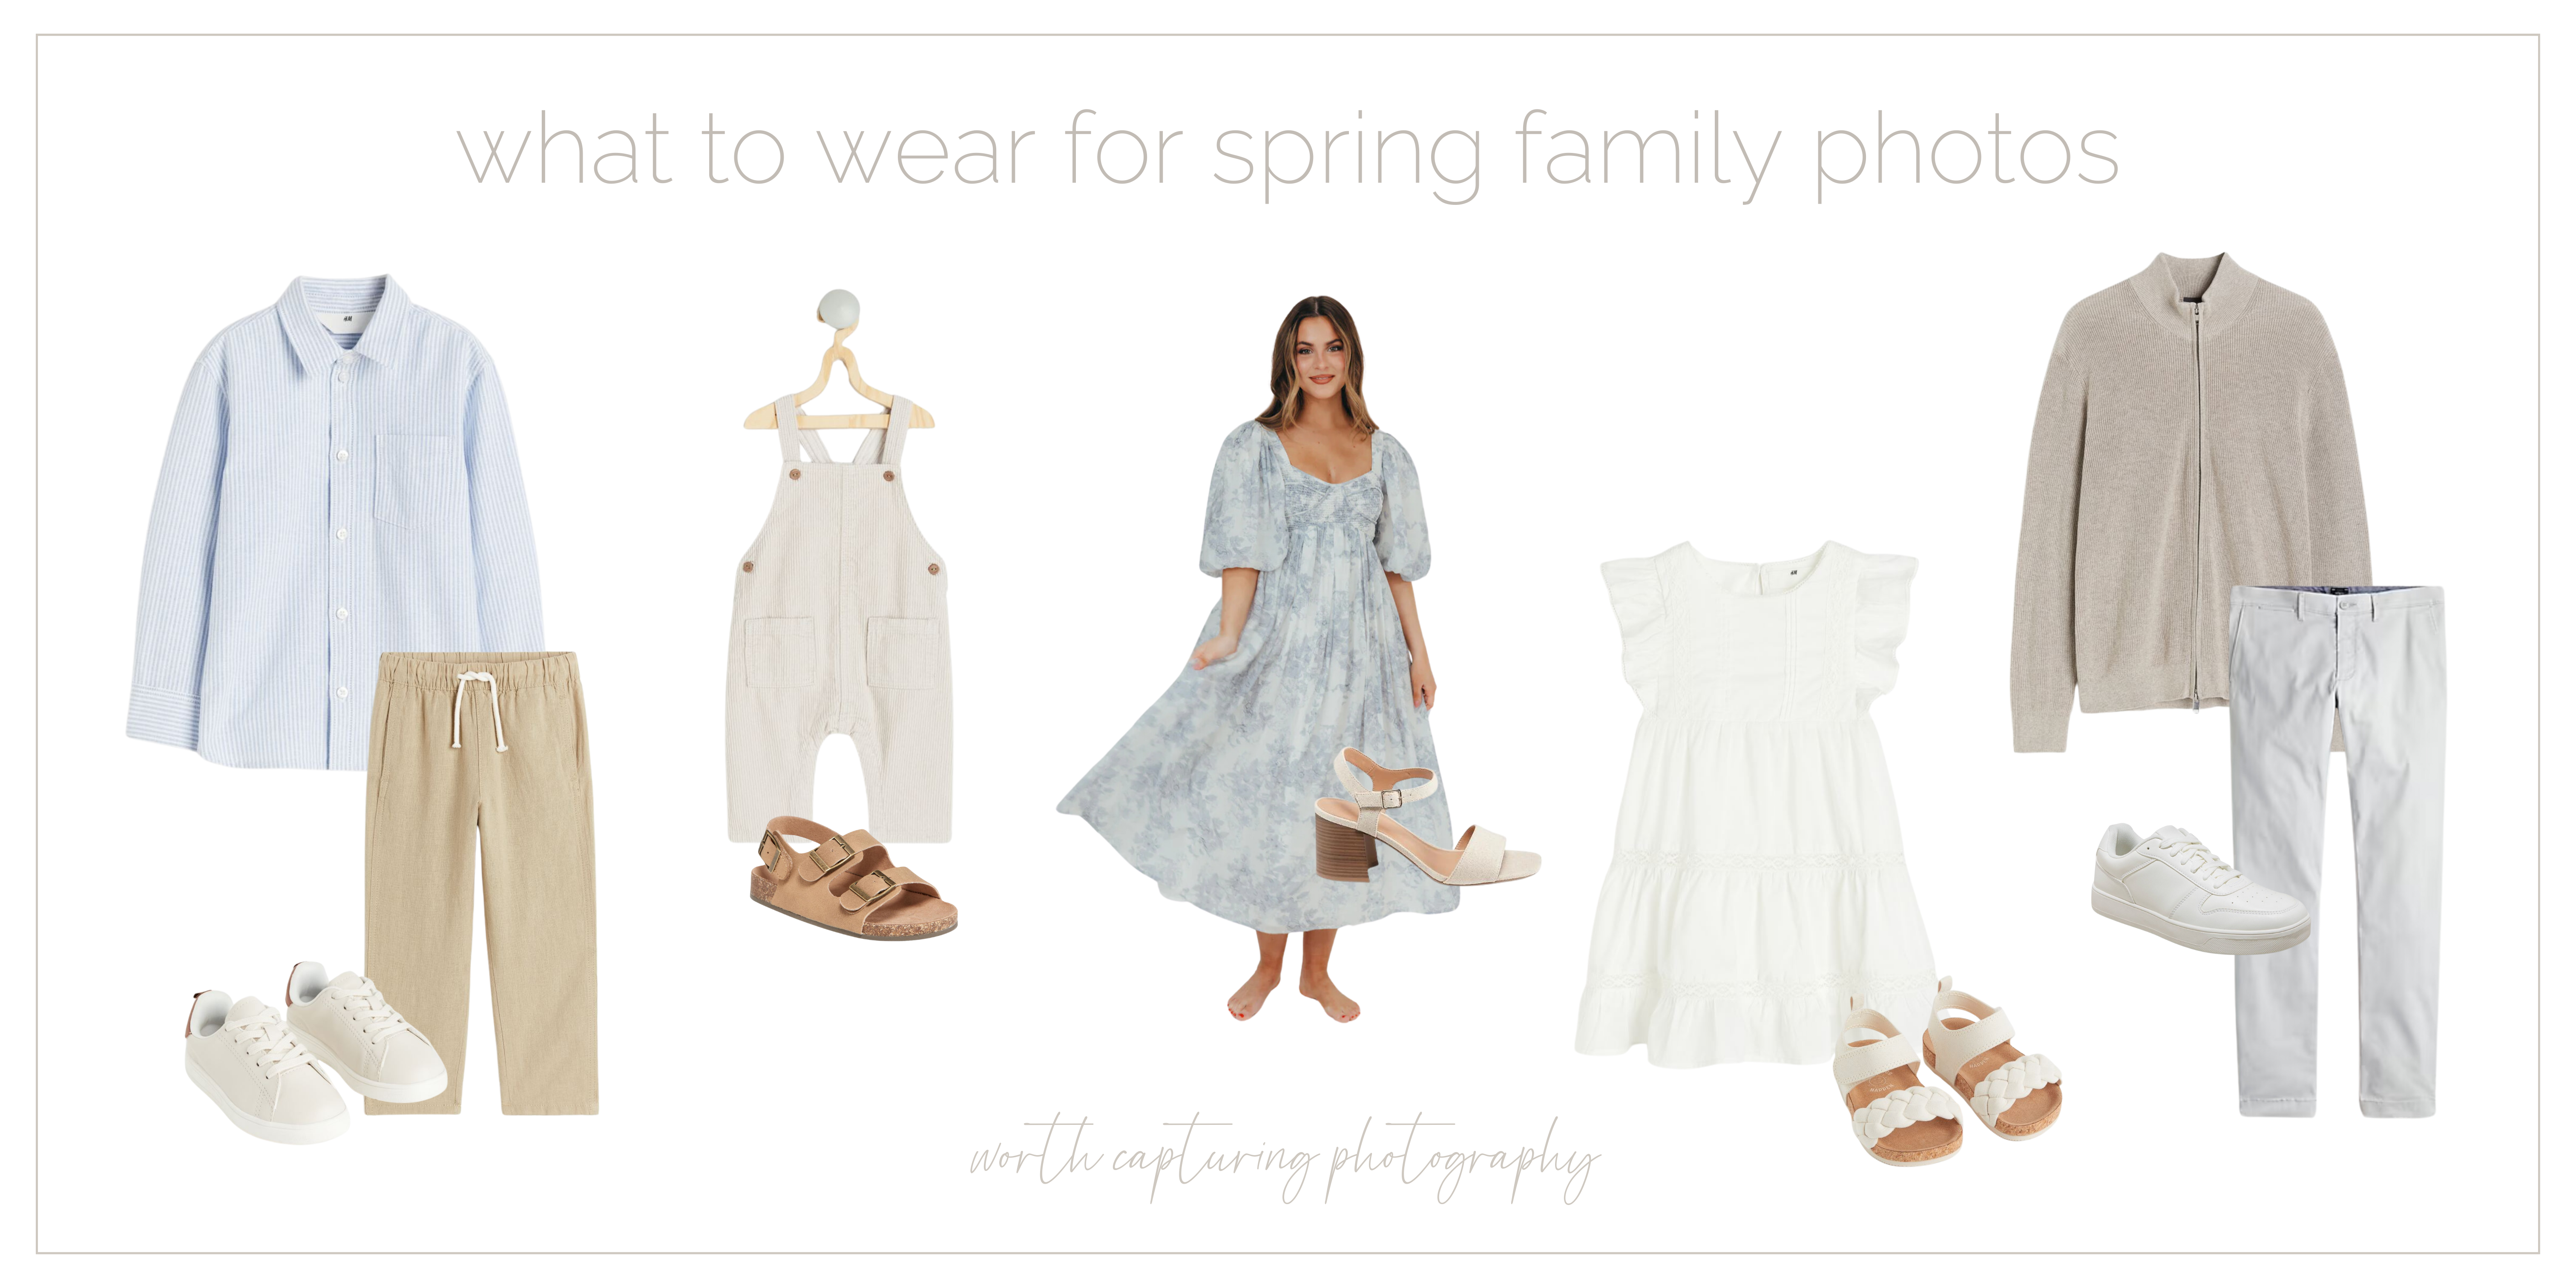 Spring family photo outfit idea with light blue and neutral tones